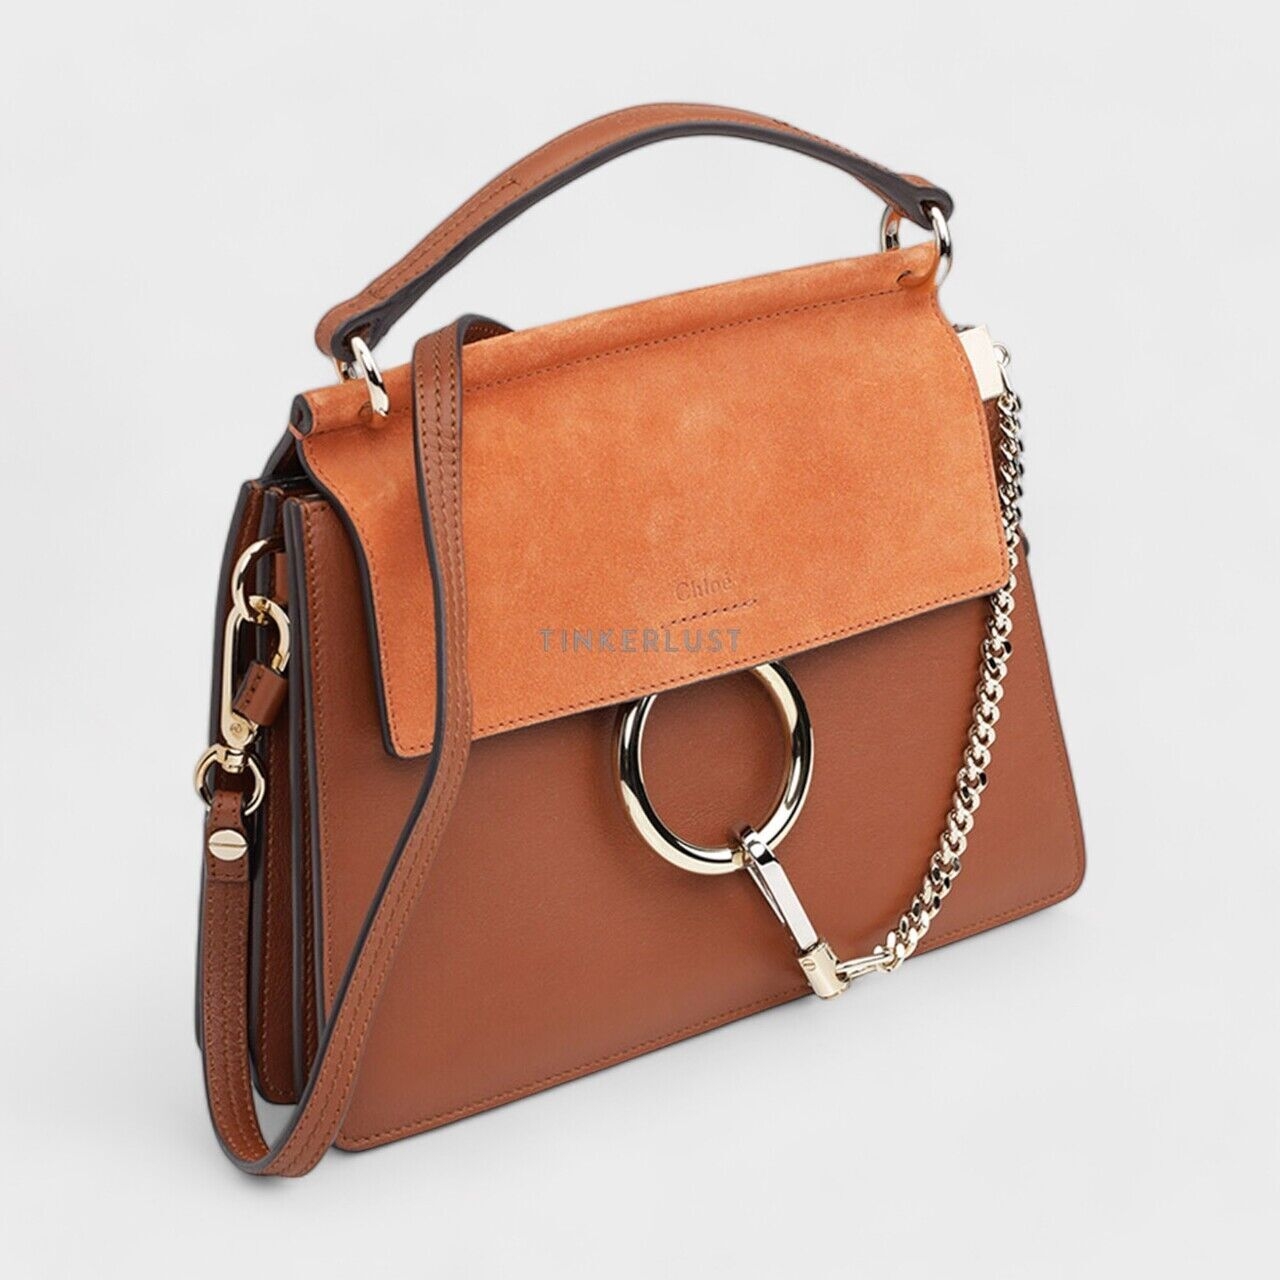 Chloe Small Faye Top Handle Bag in Classic Tobacco Smooth Leather & Suede Satchel